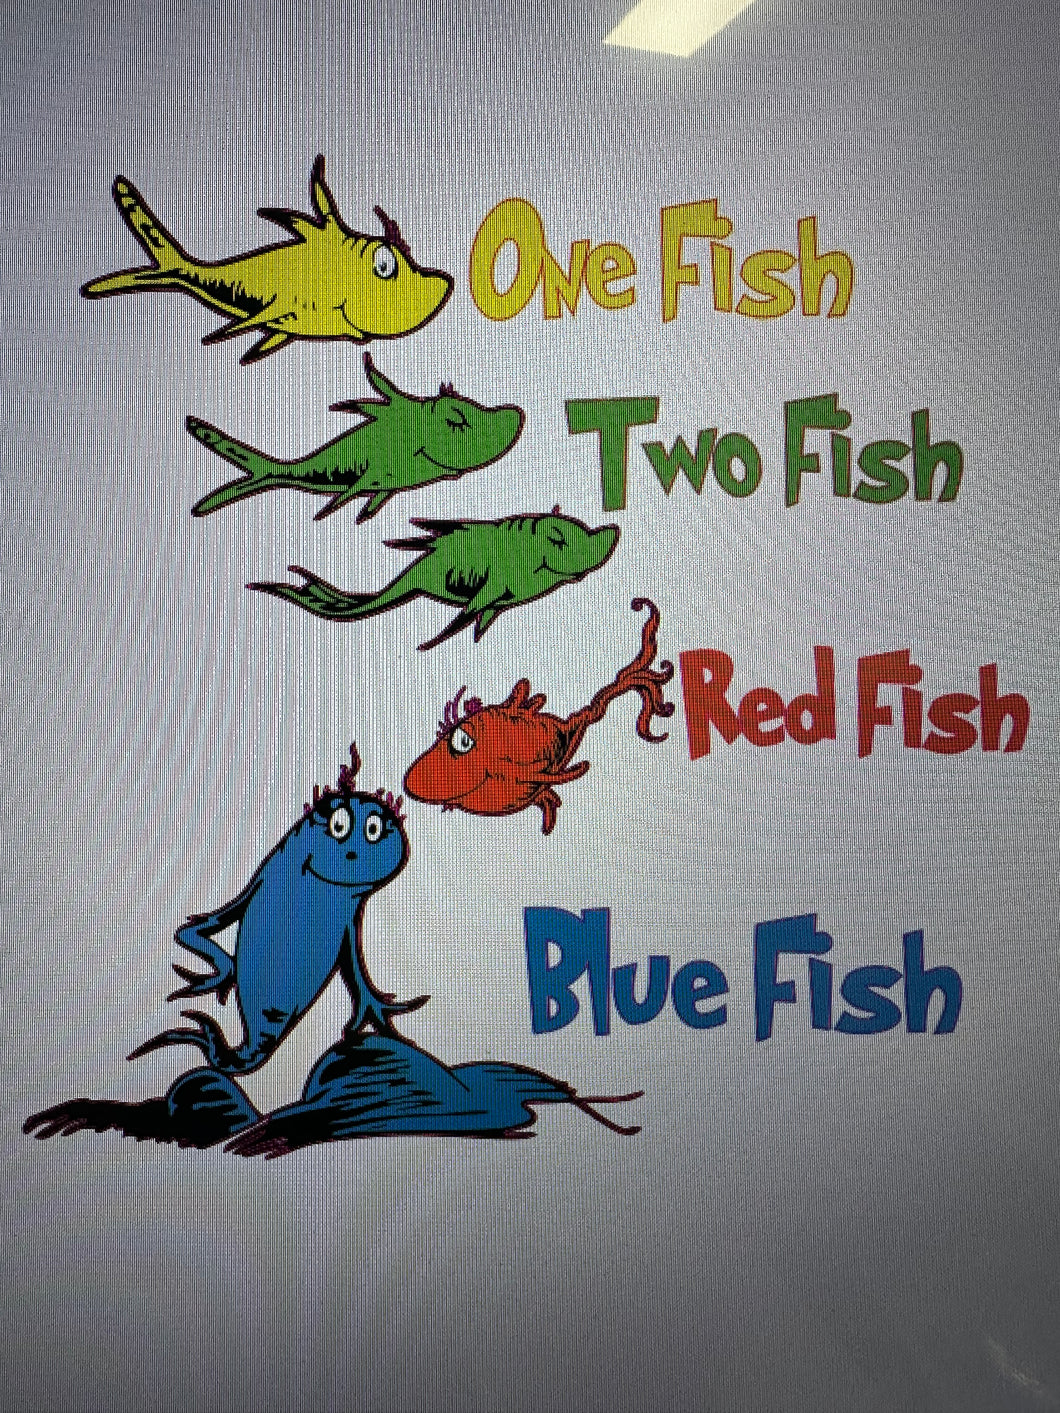 One fish two fish